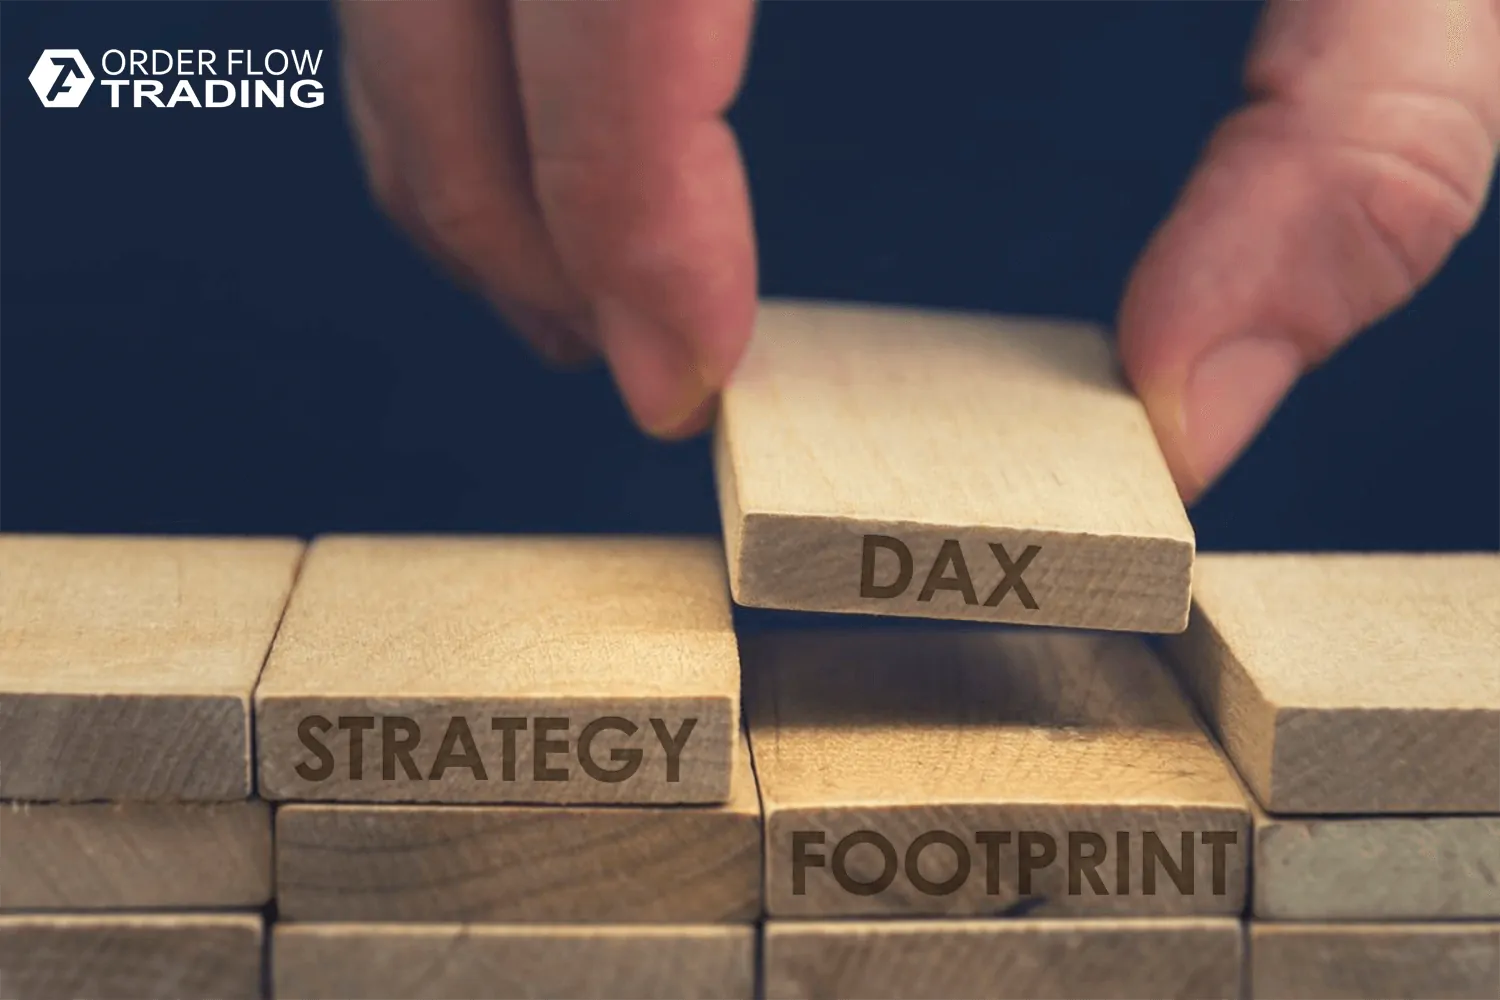 Strategy of using the footprint through the example of dax